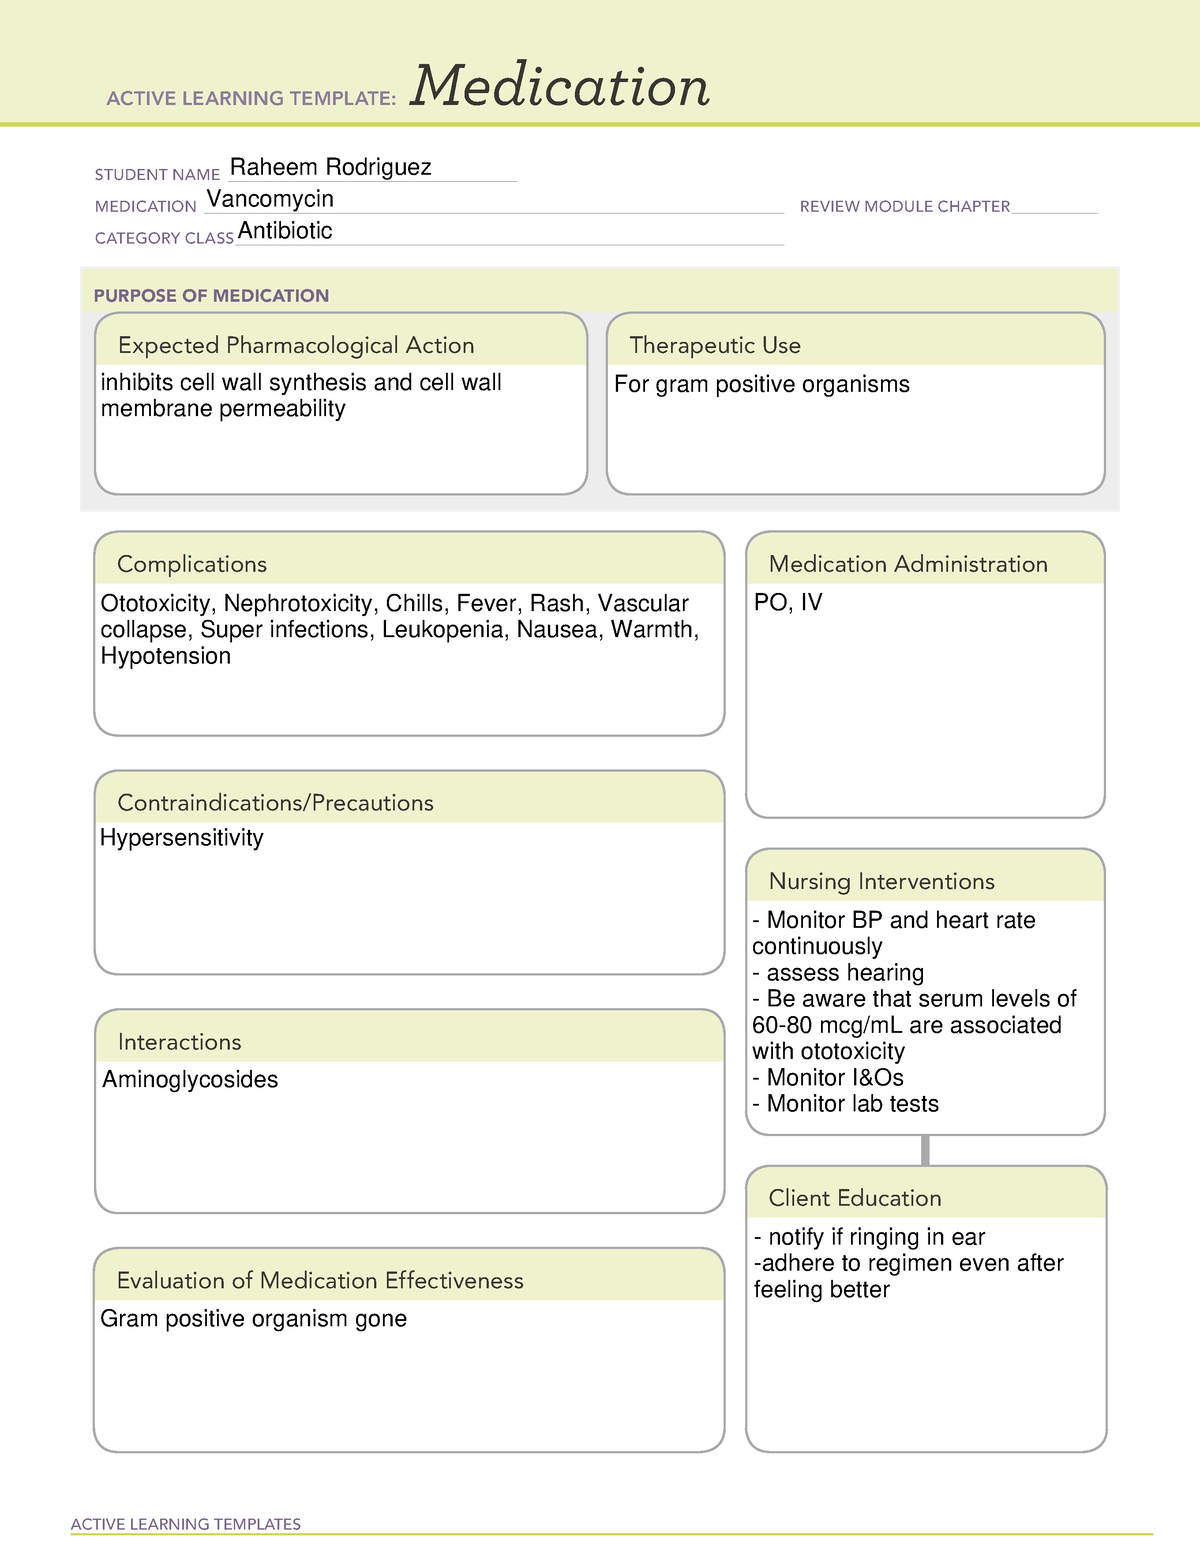 ATI medication template ACTIVE LEARNING TEMPLATES